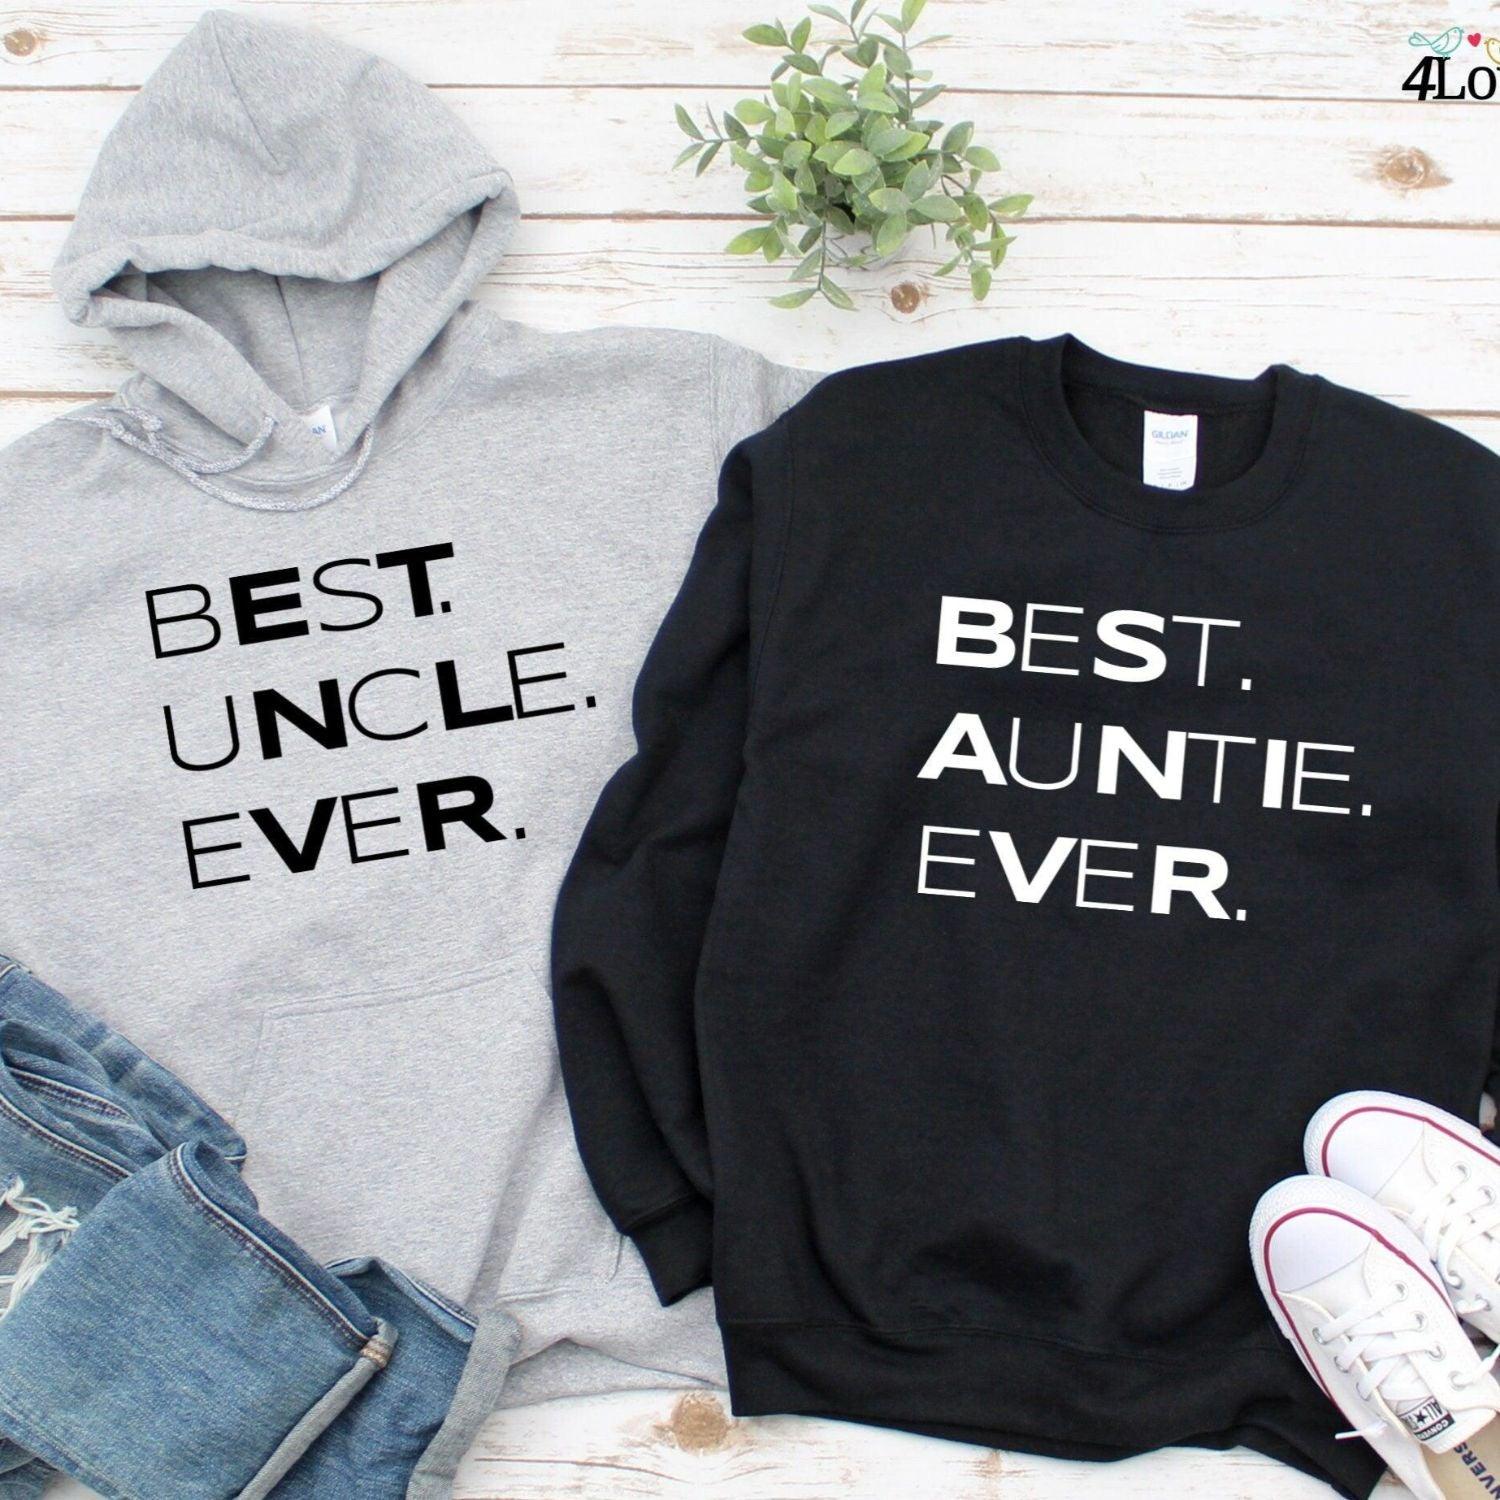 Matching Outfit Gift Set: Best Uncle/Auntie - Birthday, Father's Day, Xmas Ideas - 4Lovebirds